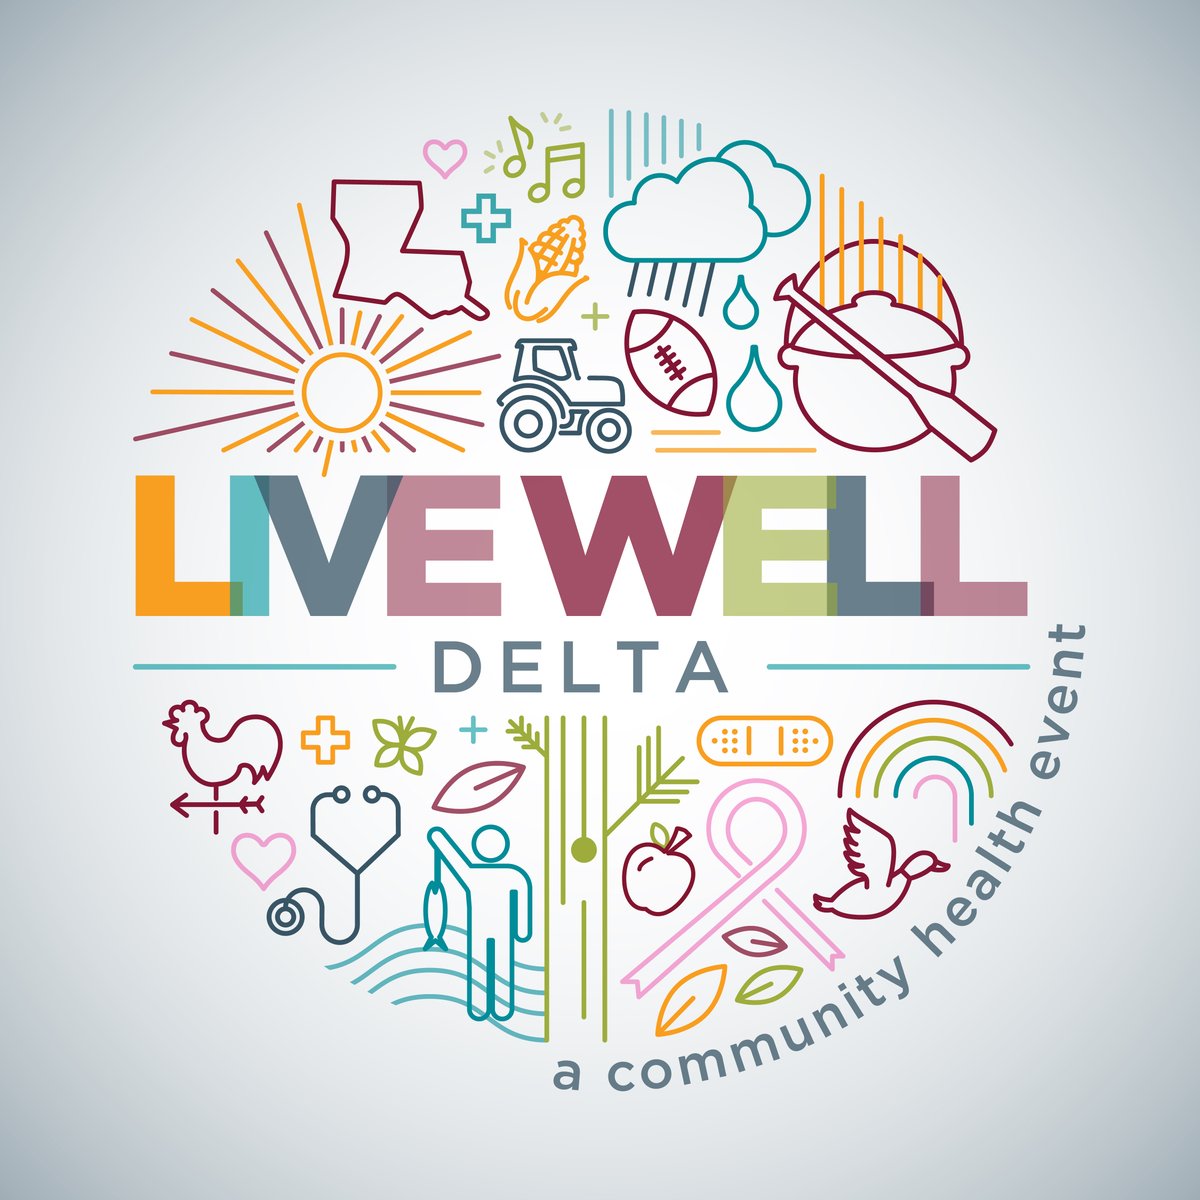 Mark your calendar!📅Sign up today for our first Live Well Delta event on 9/17. Join the fun activities, grab some food & listen to live music. And of course FREE #cancerscreenings for #breastcancer, colorectal, prostate and #skincancer. Register now! marybird.org/livewelldelta